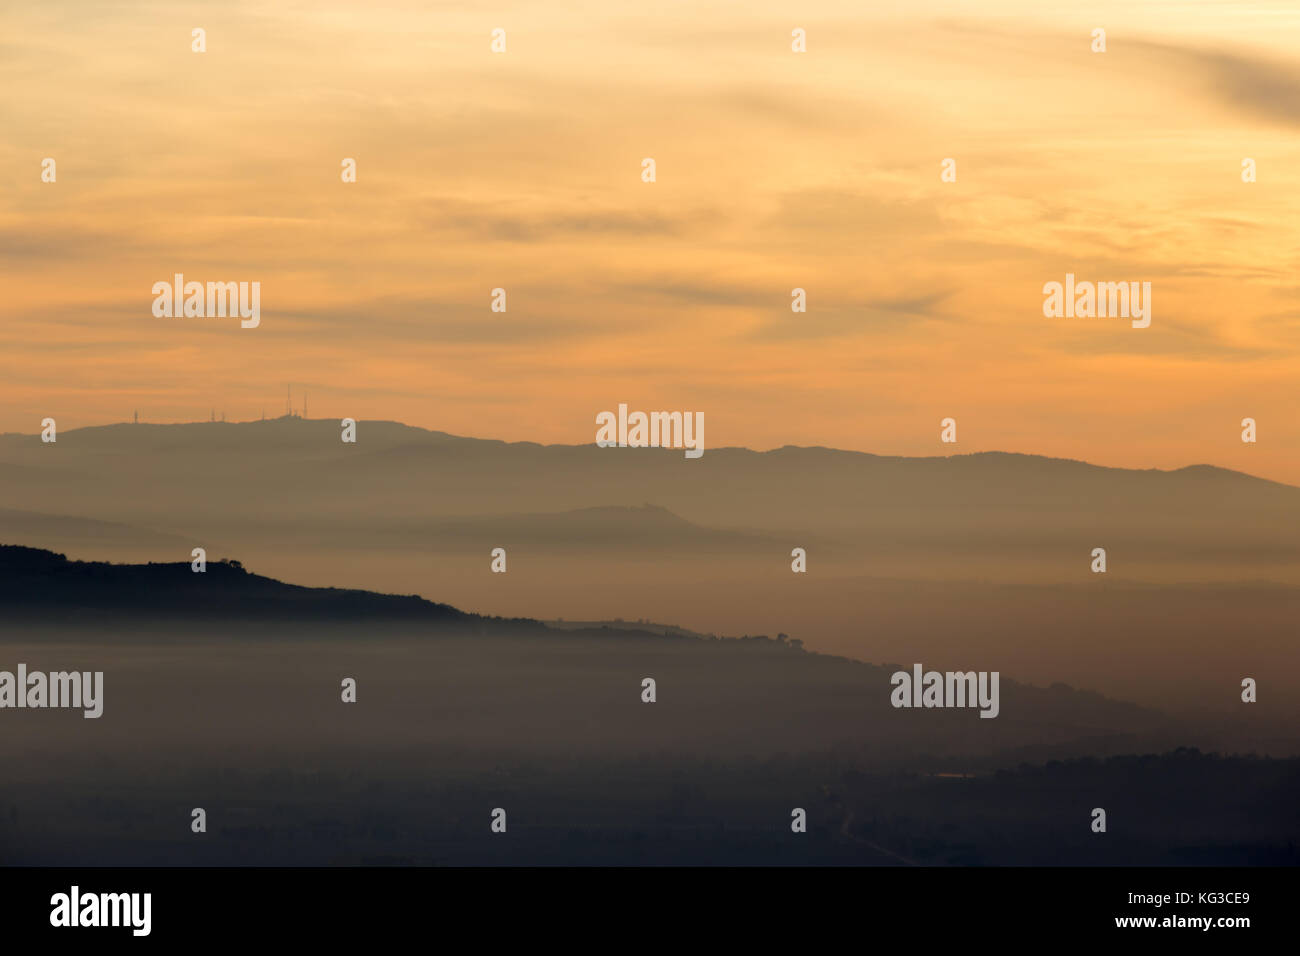 A valley filled by mist at sunset, with various layers of hills and mountains, and warm colors in the sky Stock Photo